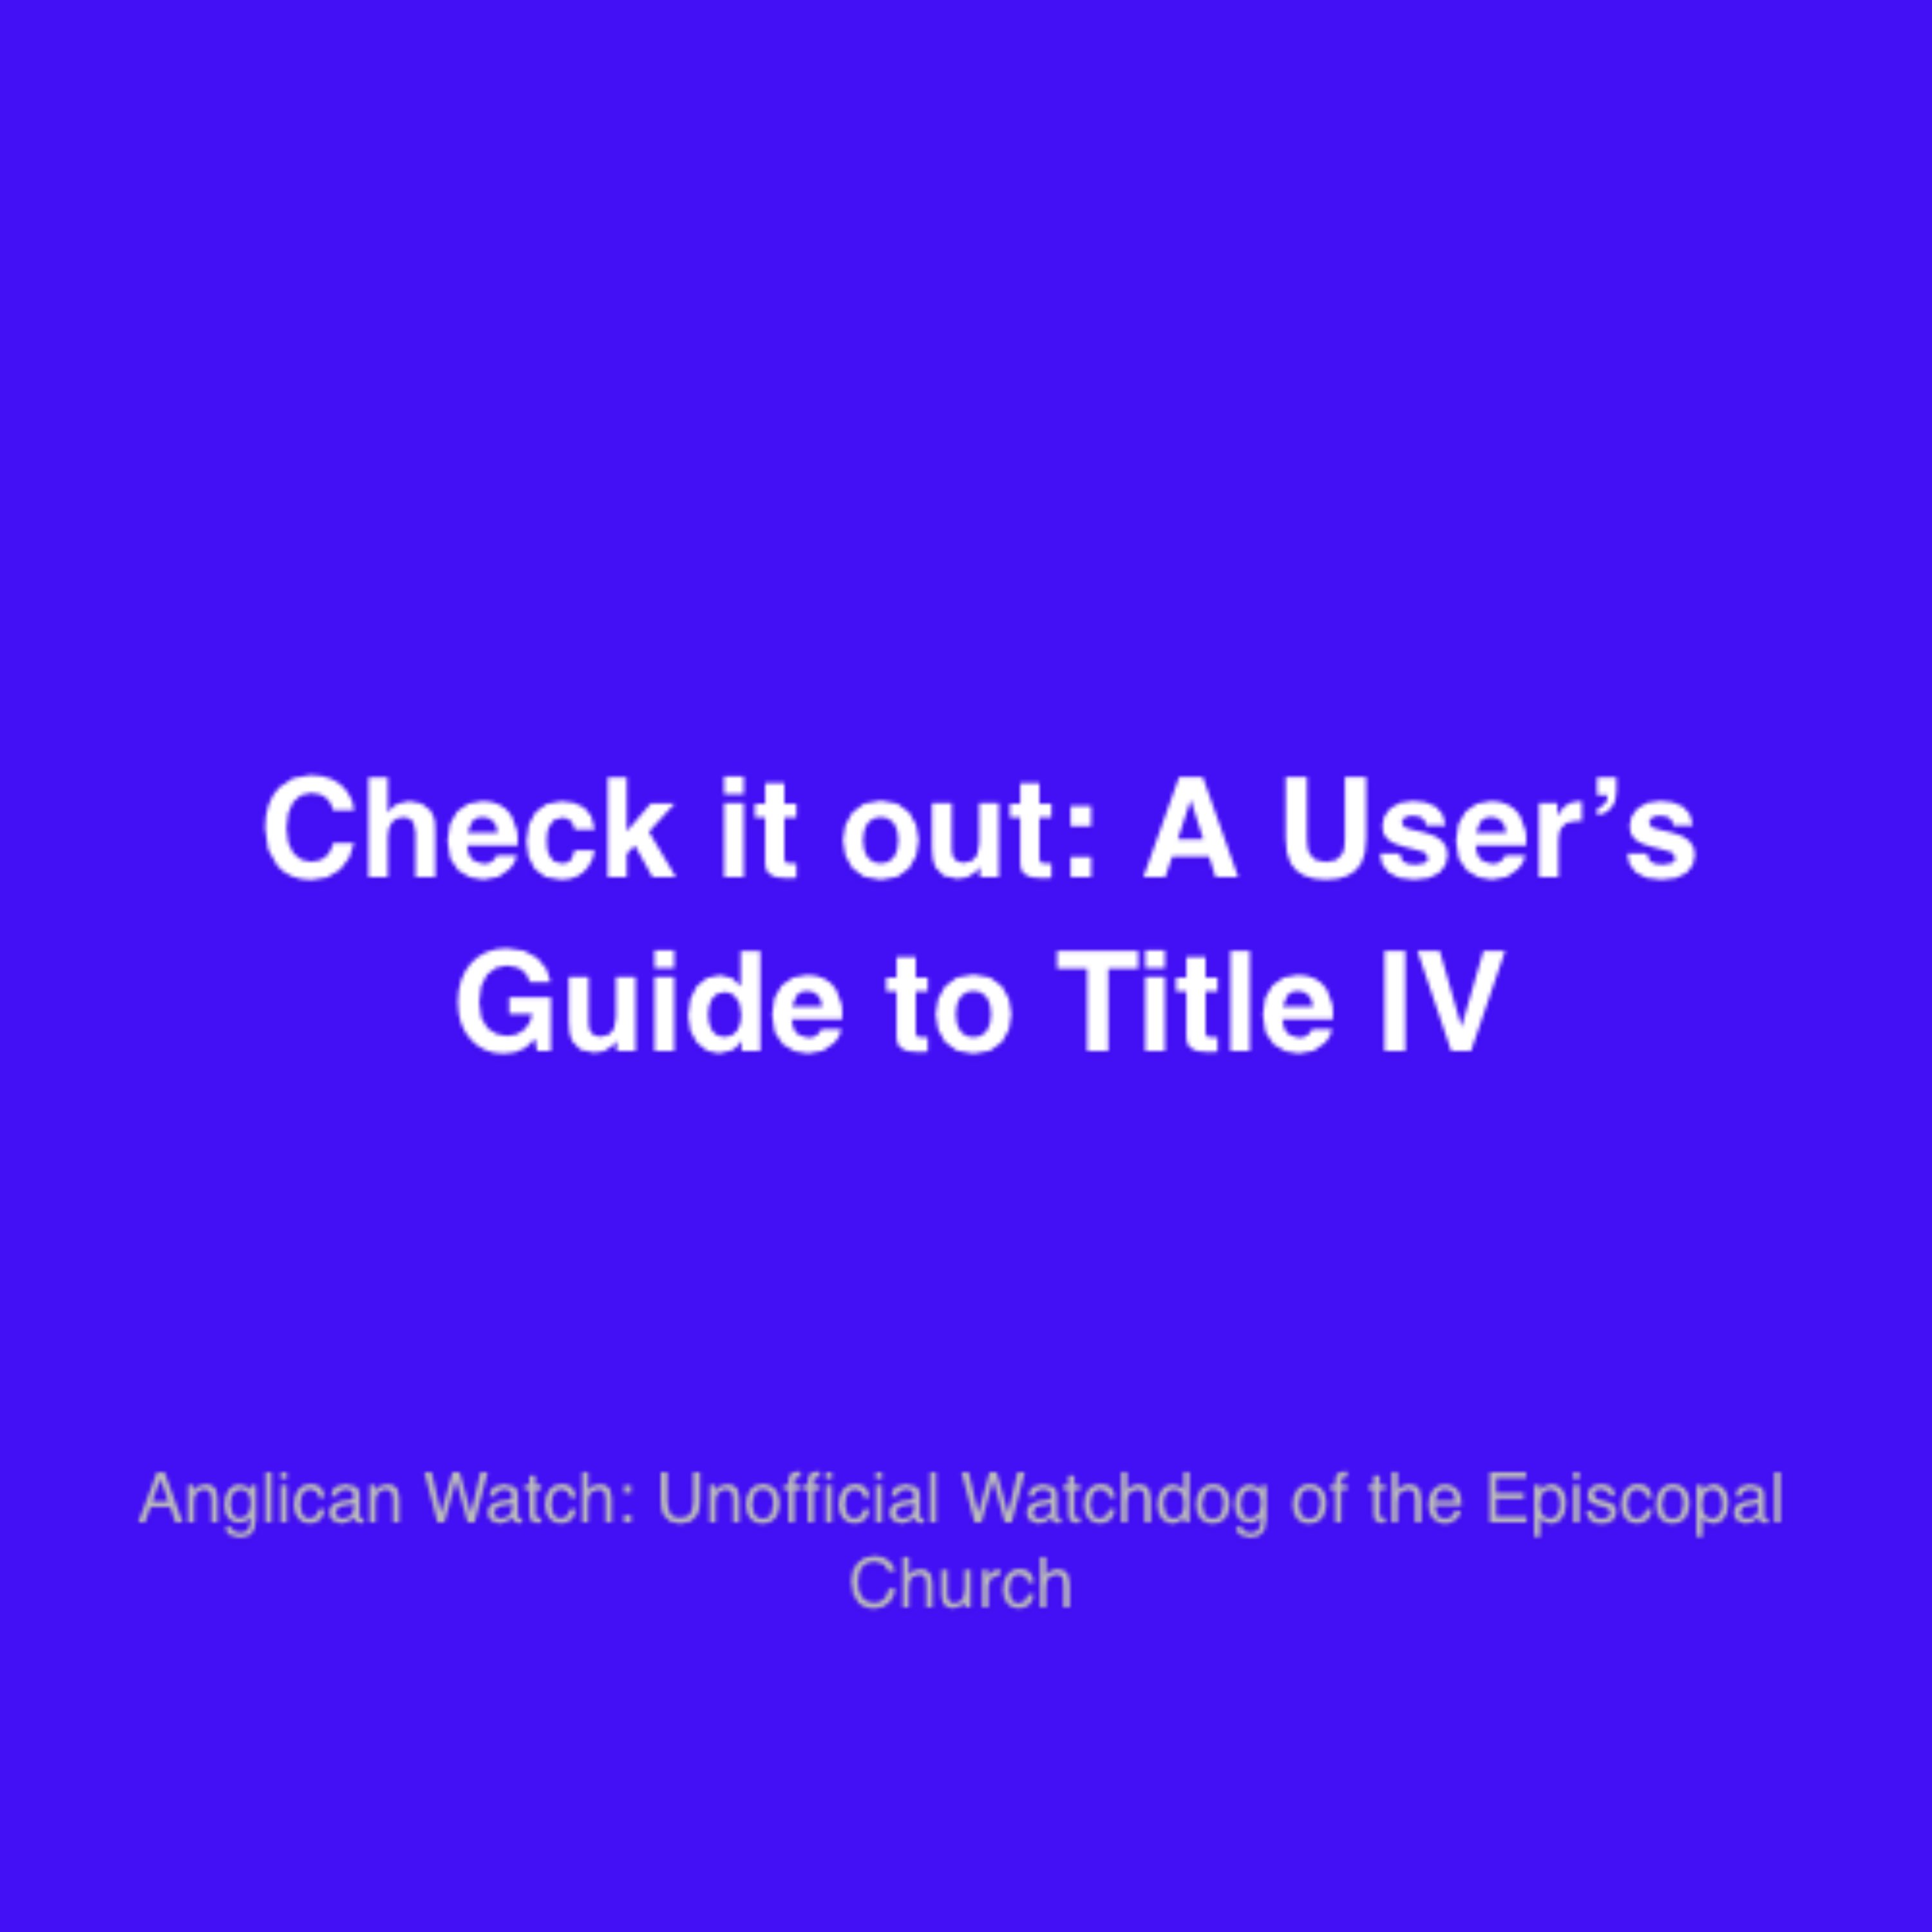 Check it out: A User’s Guide to Title IV